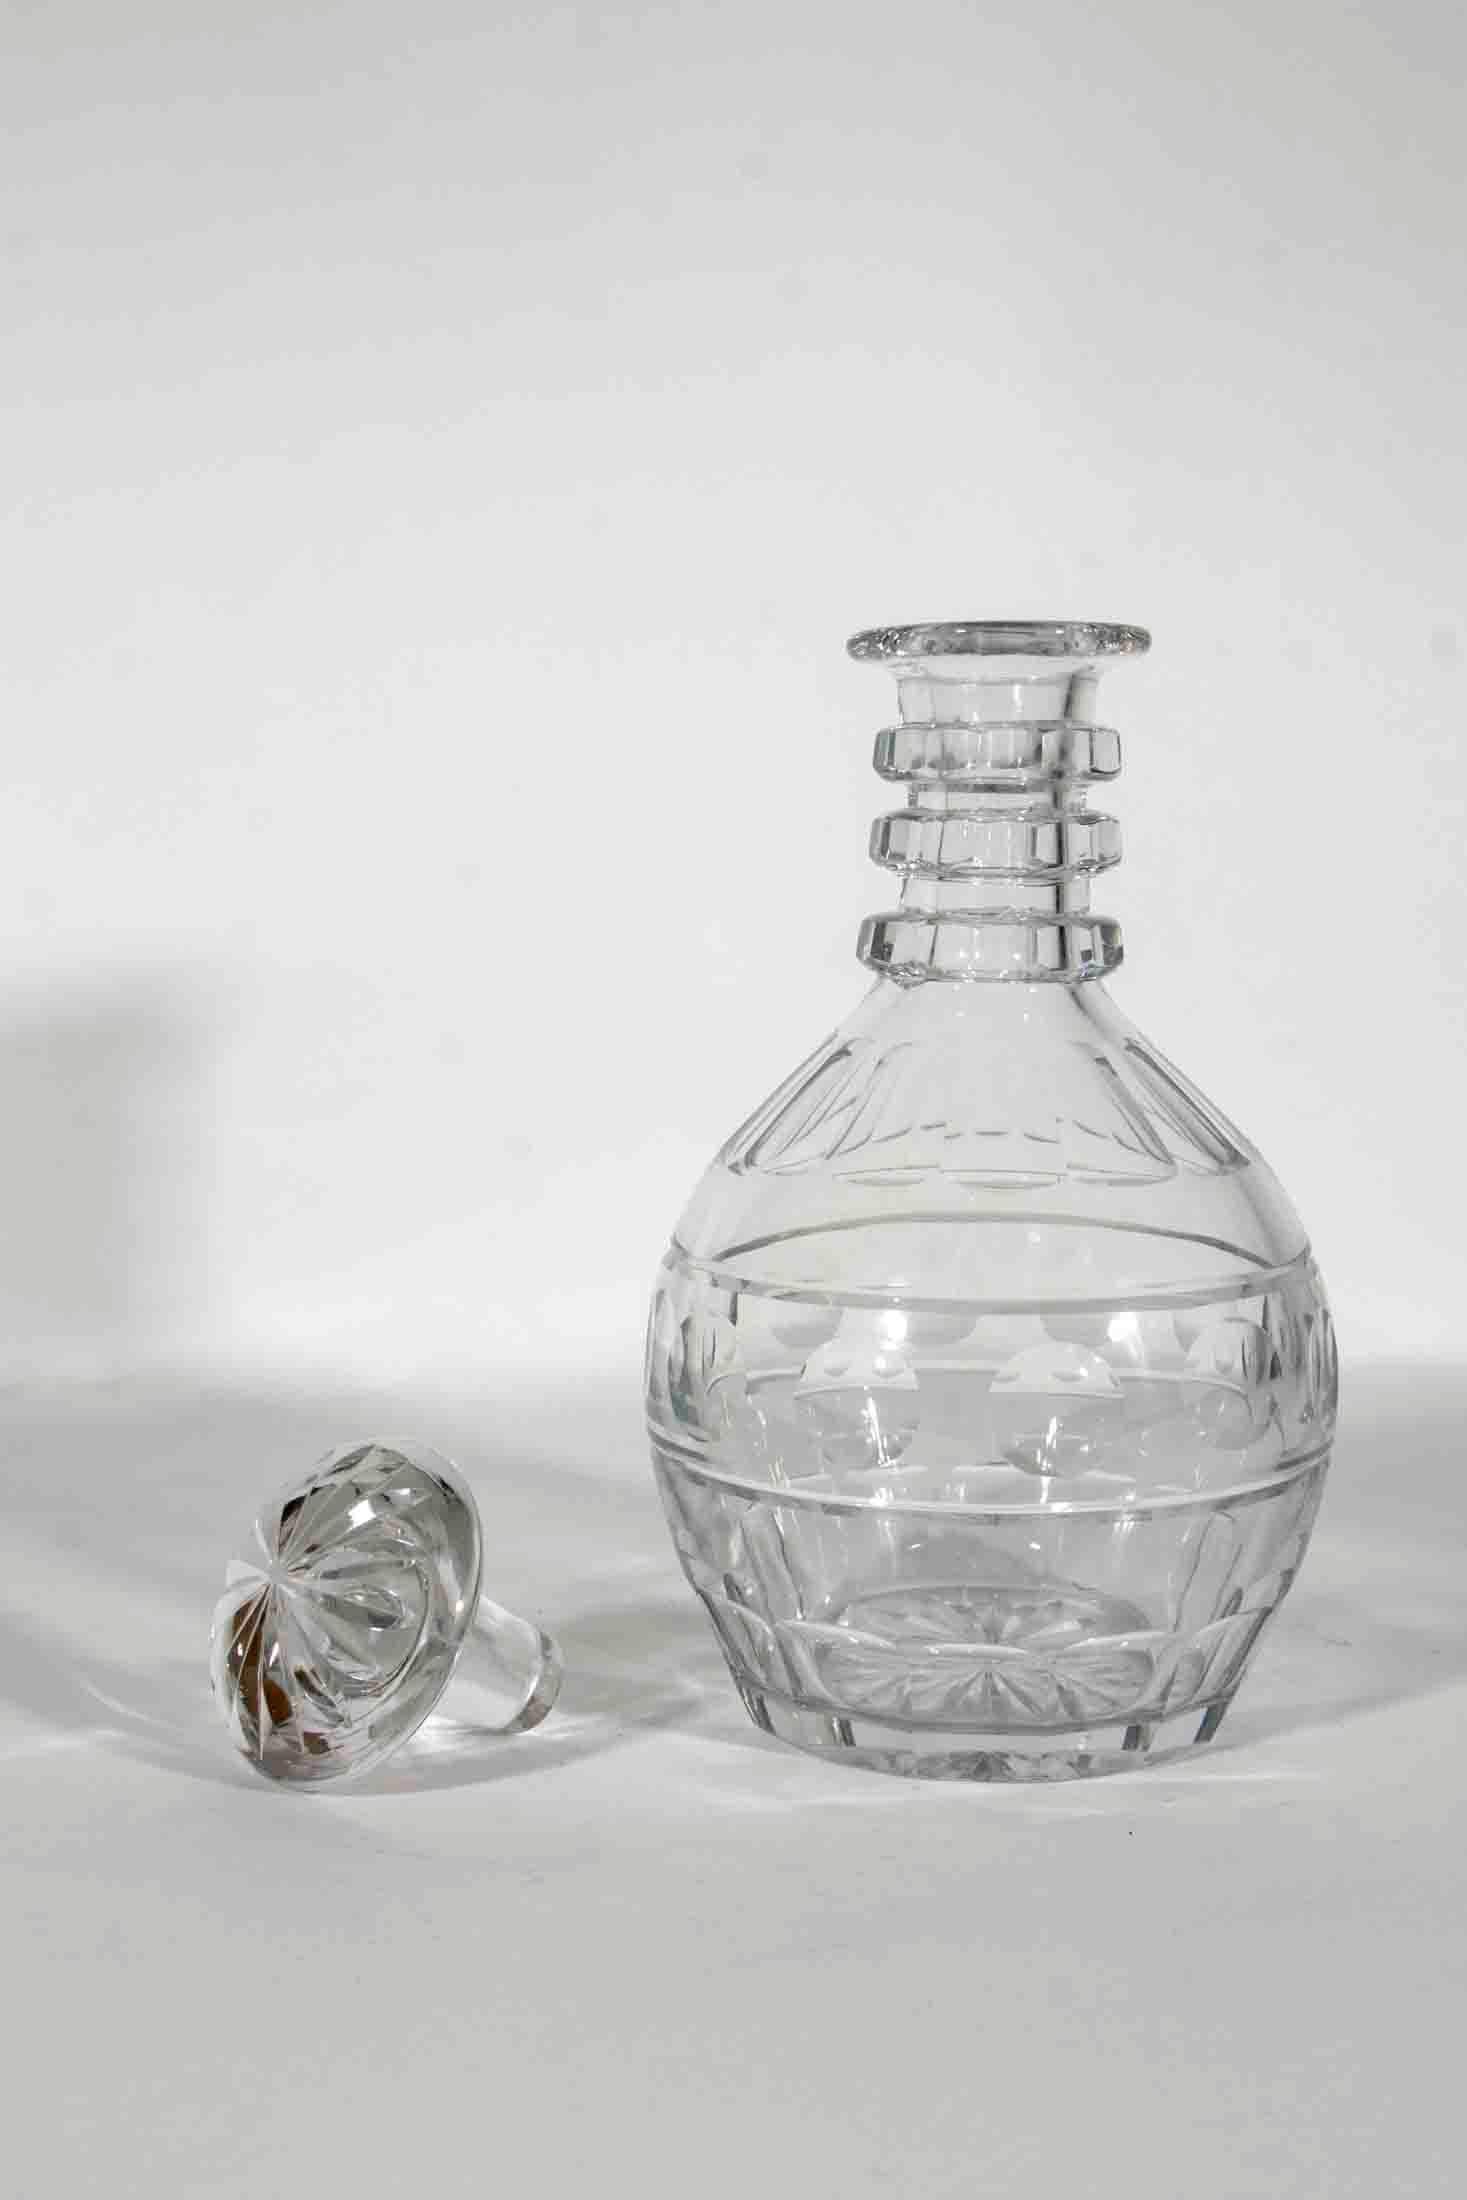 Vintage clear cut crystal decanter. Excellent condition. The piece measure 9 inches high X 4 inches diameter.